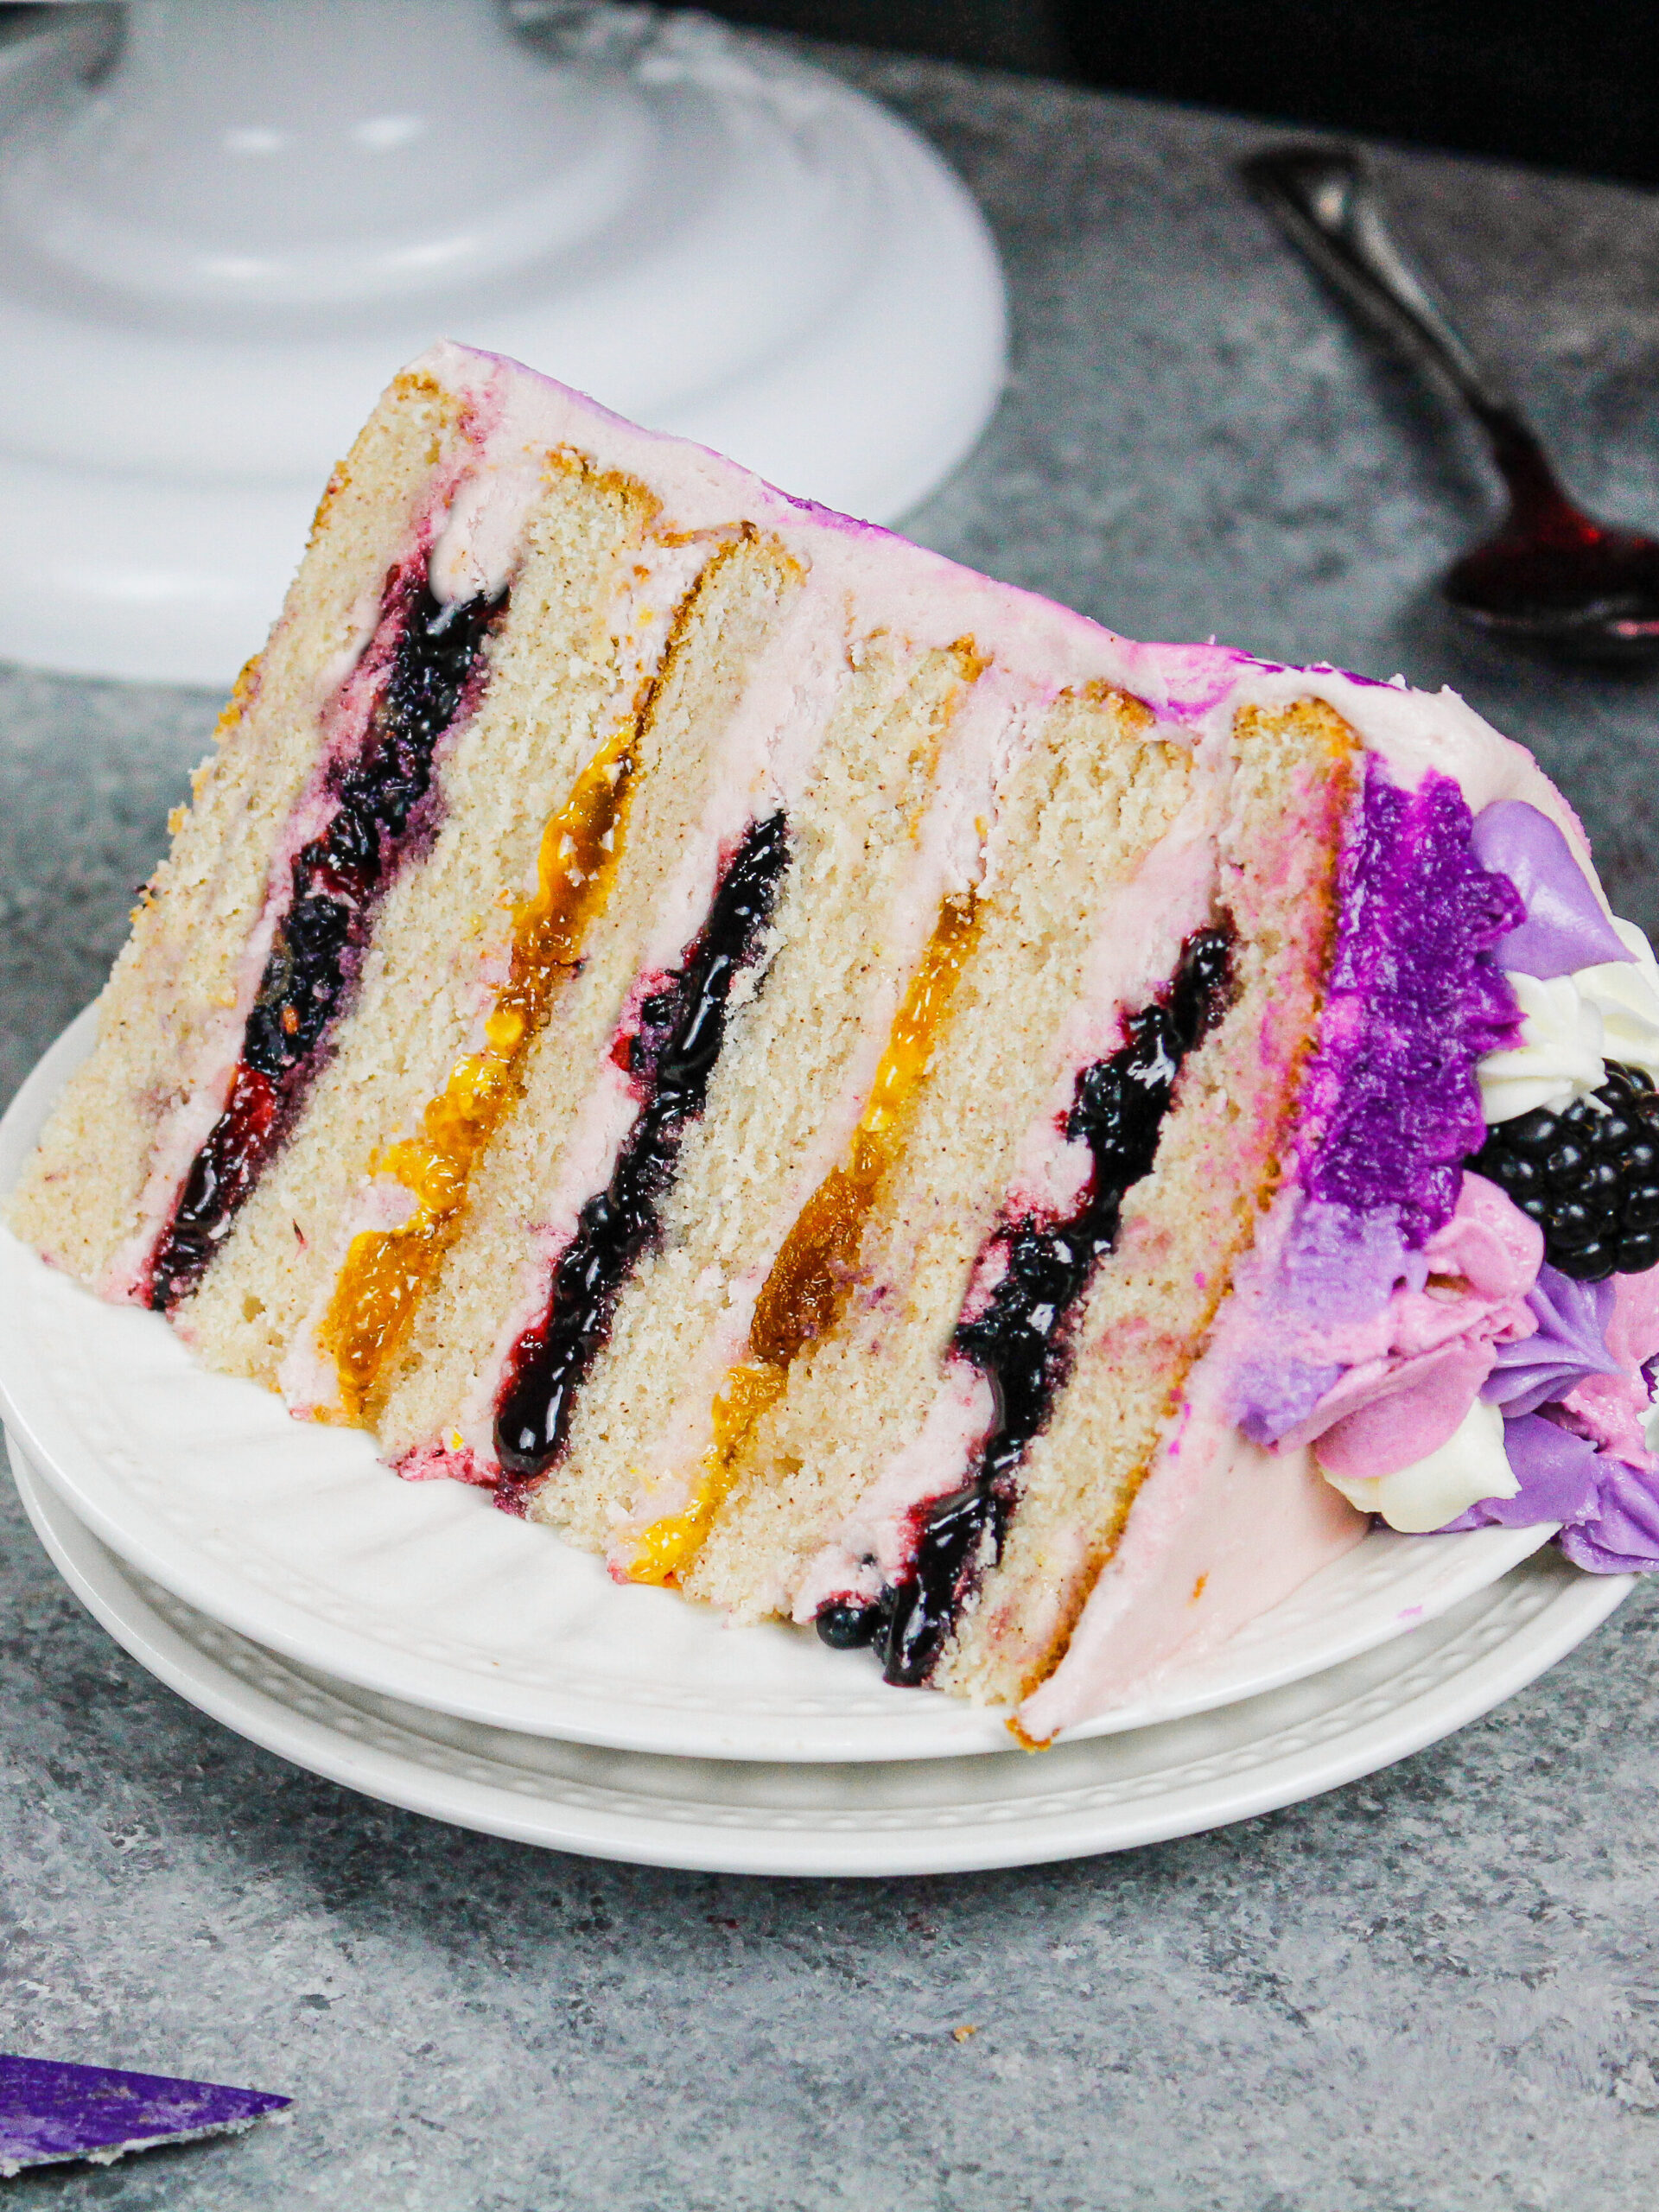 image of a slice of blackberry layer cake being assembled with cinnamon cake layers, blackberry jam, fresh blackberries, and blackberry peach buttercream